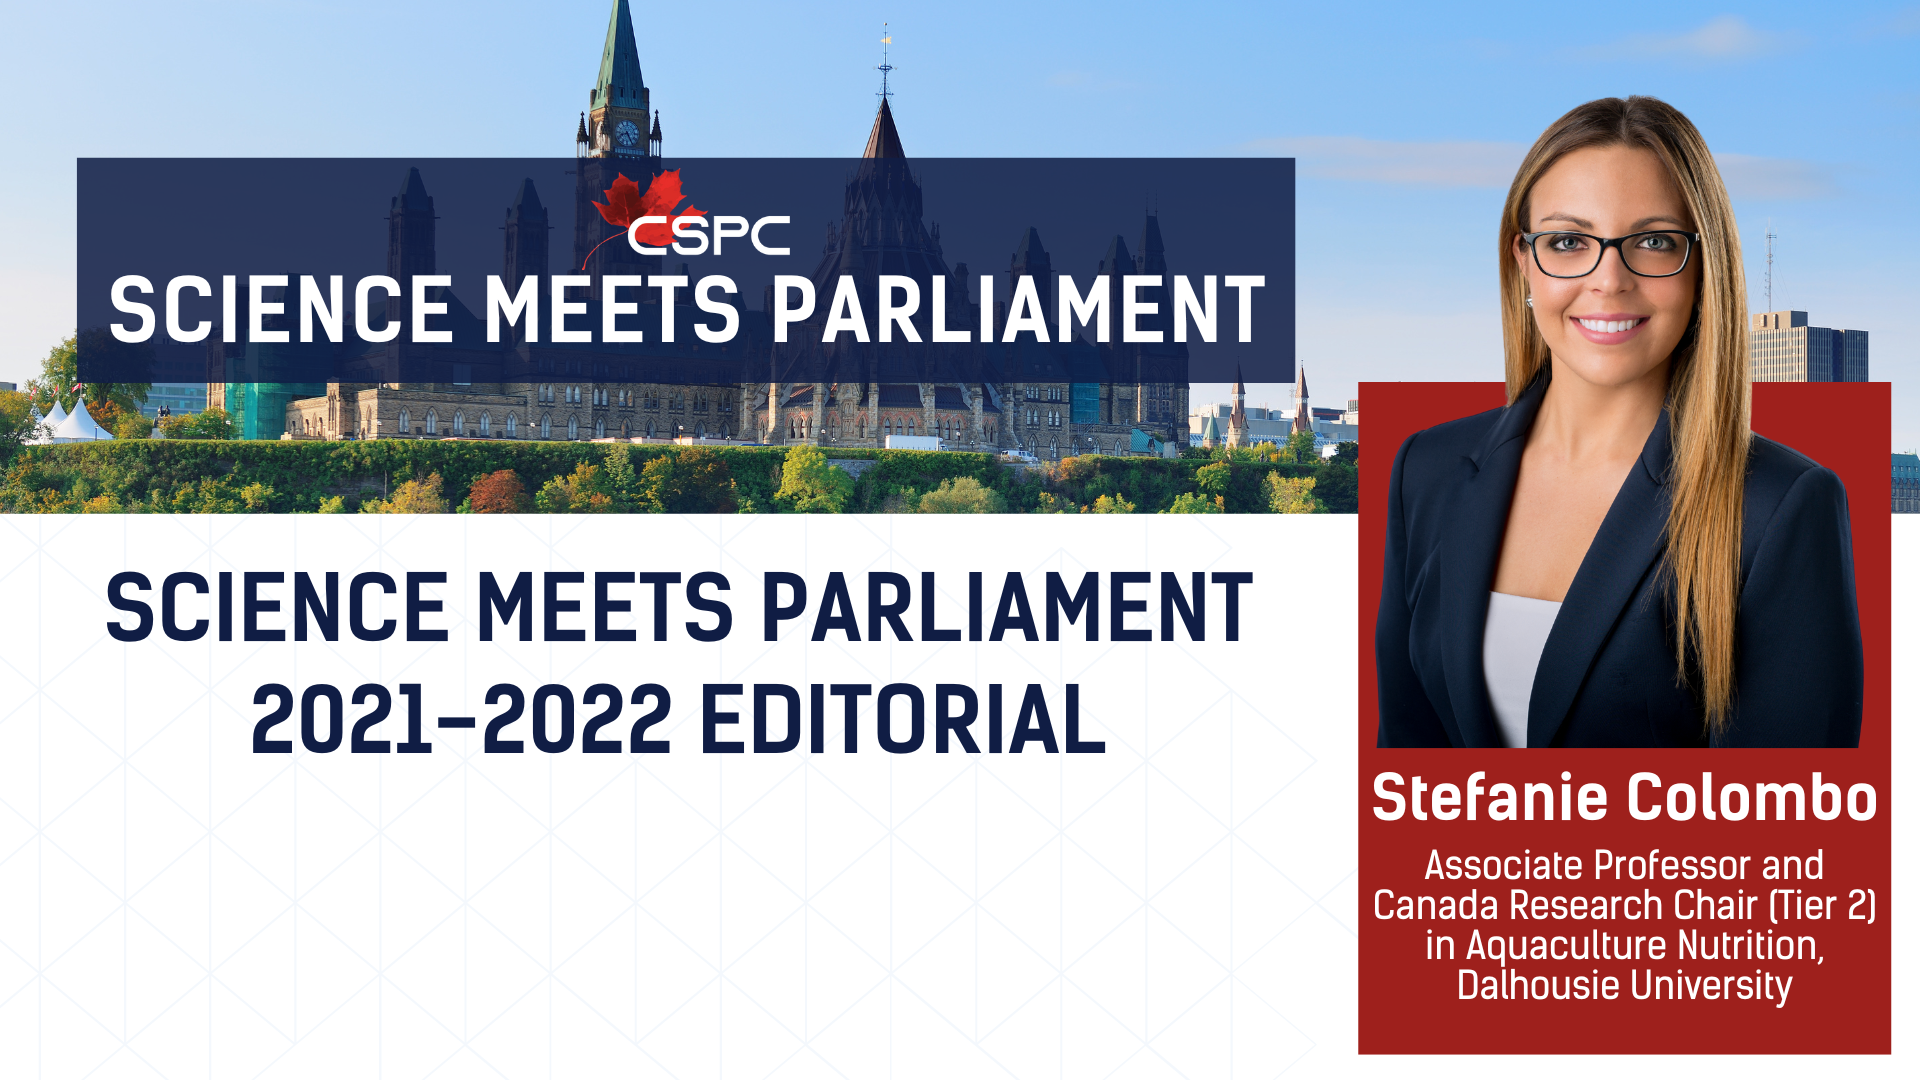 a banner with the title "Science Meets Parliament 2021-2022" alongside a headshot of a white woman with glasses